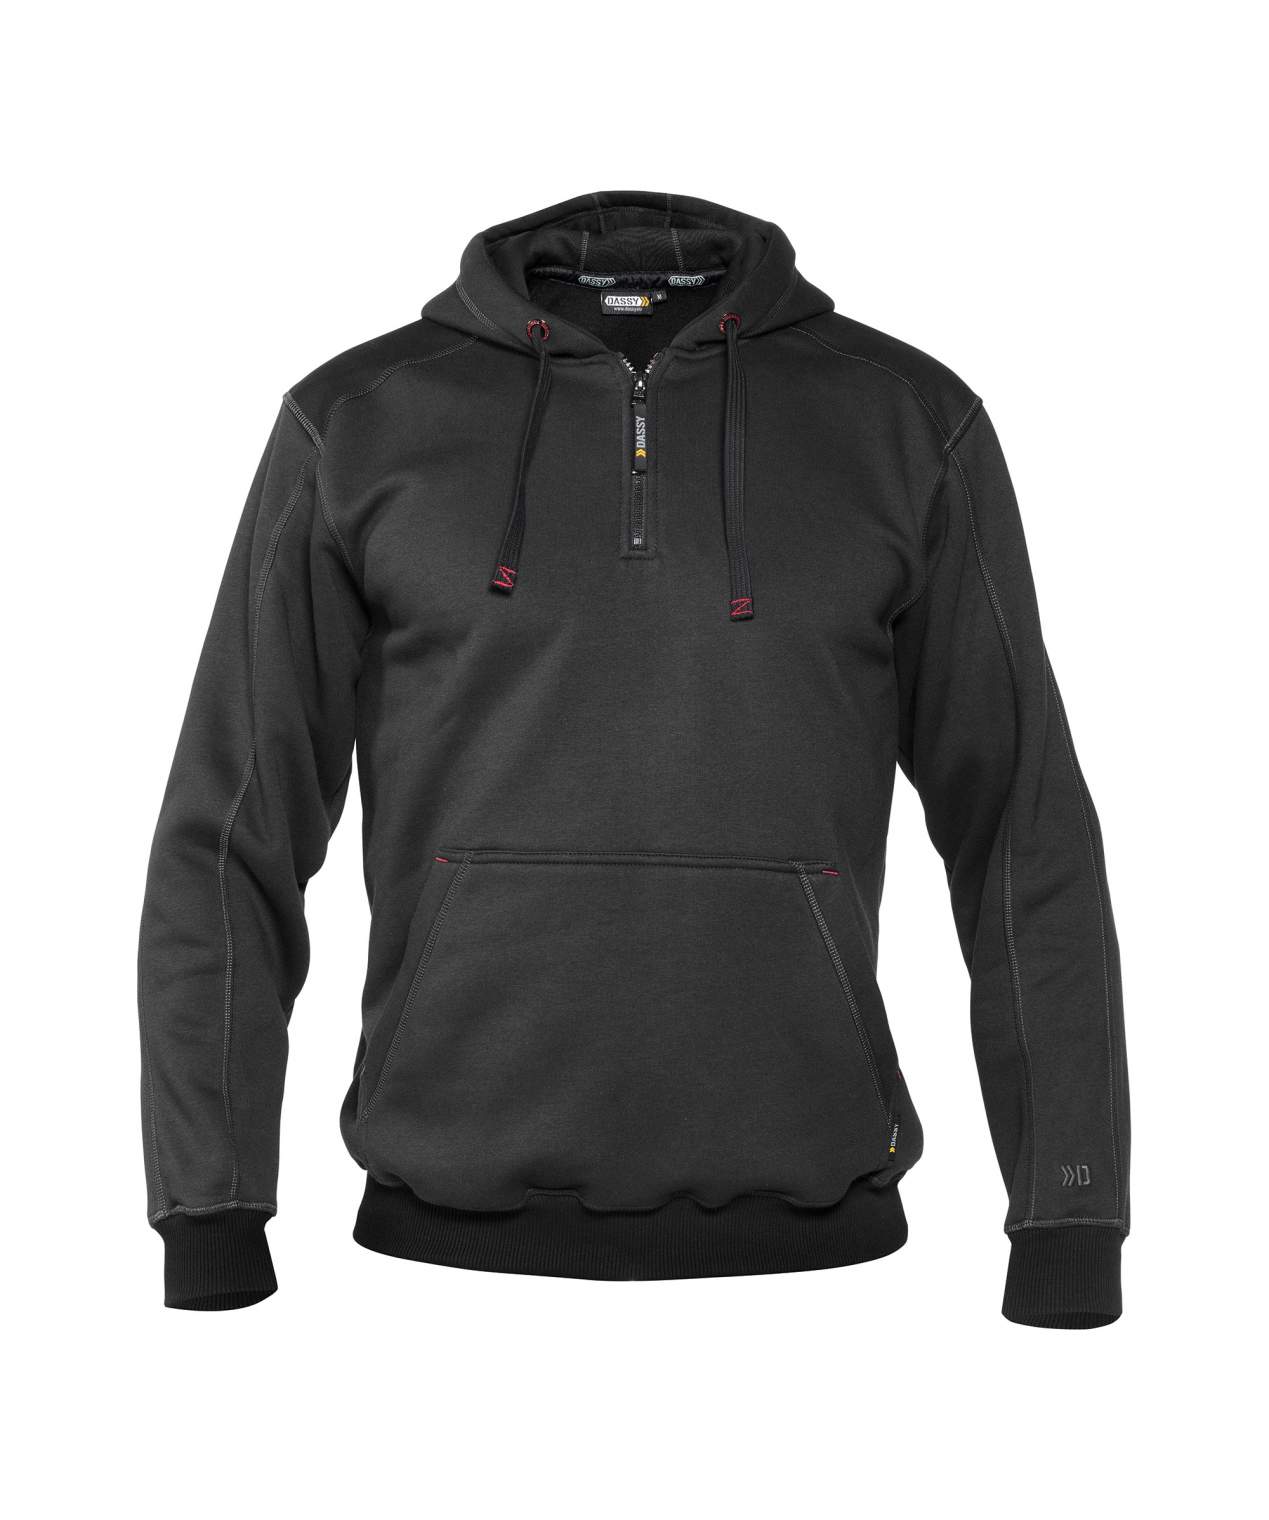 indy hooded sweatshirt anthracite grey black front